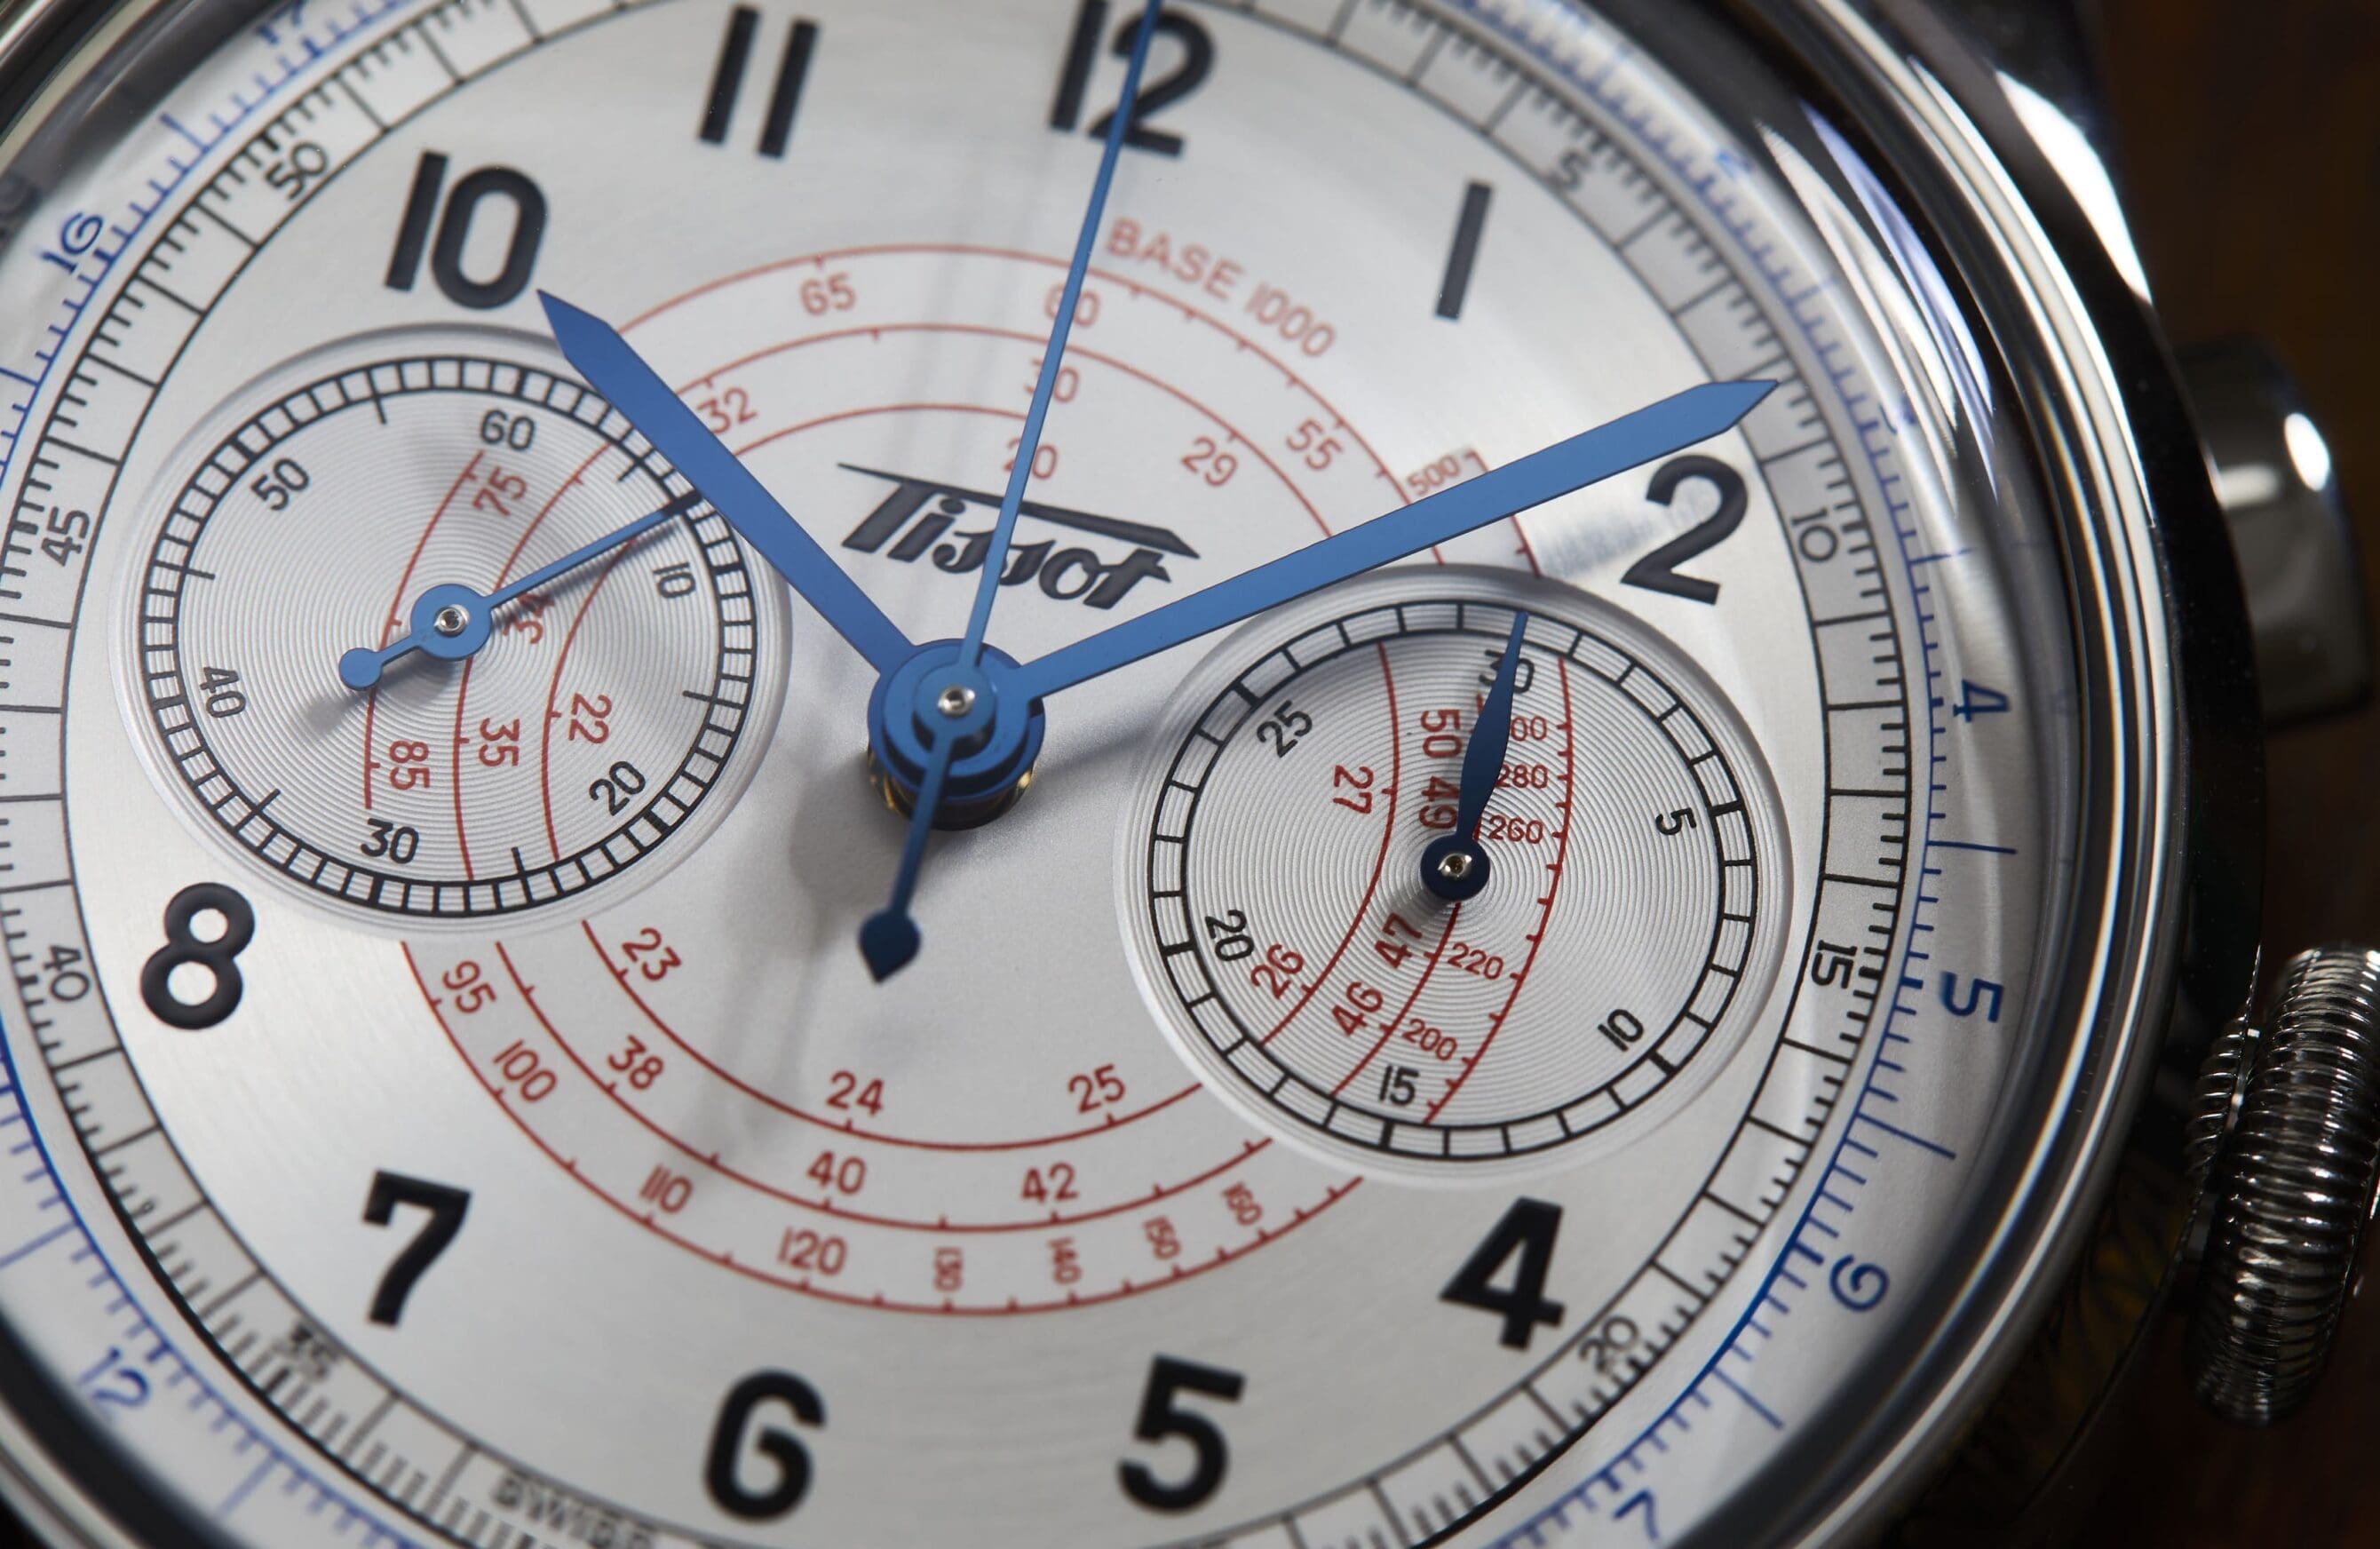 Tissot’s new Telemeter 1938 brings vintage style to a thoroughly modern chronograph